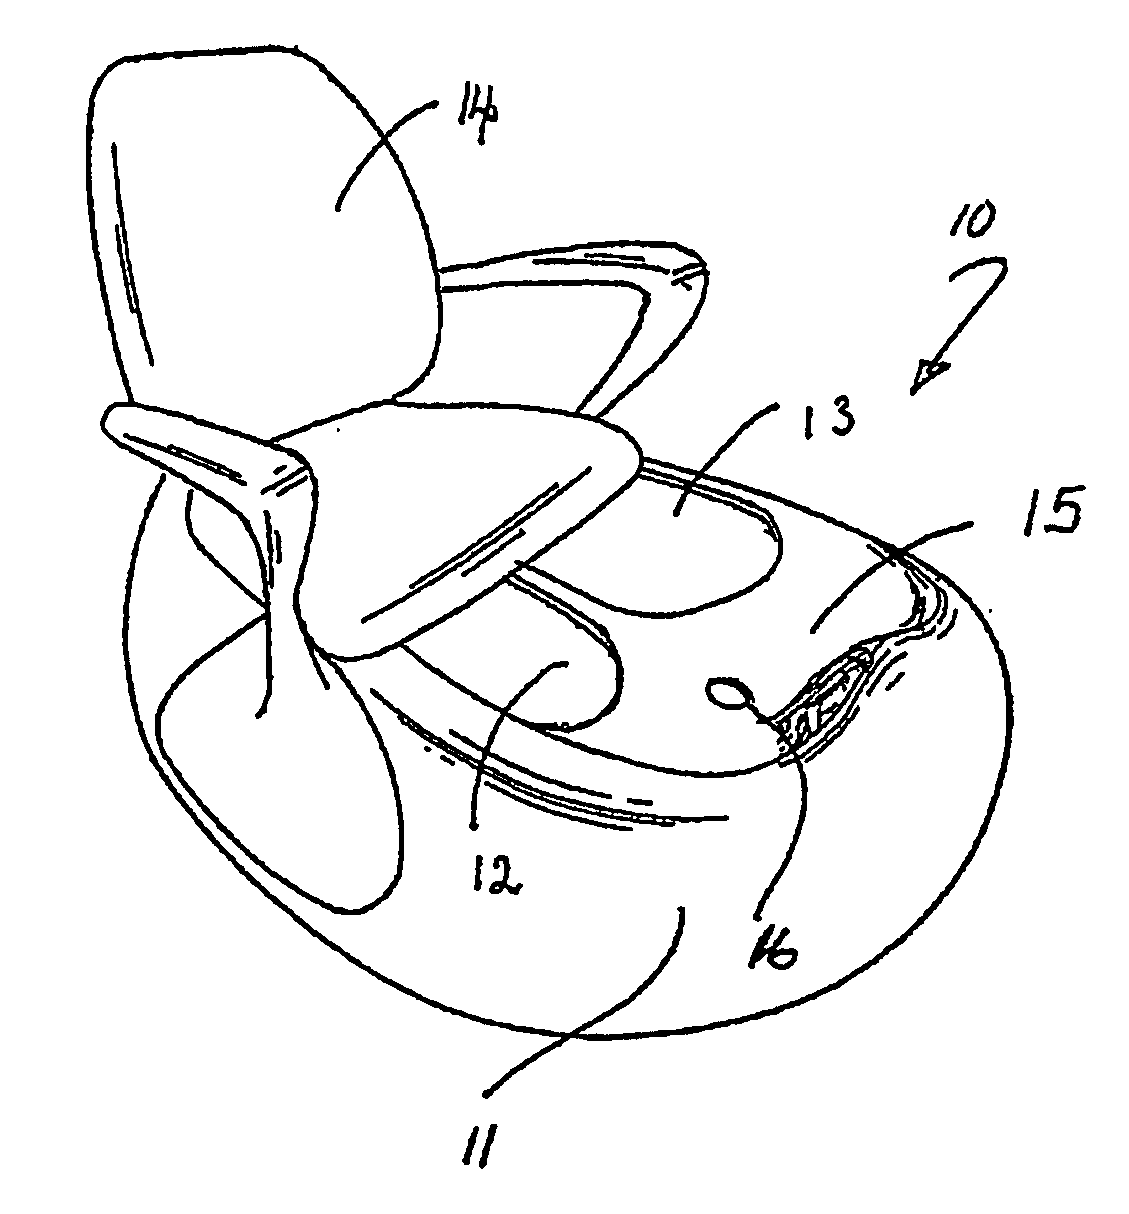 Hydrotherapy Apparatus for a Lower Extremity